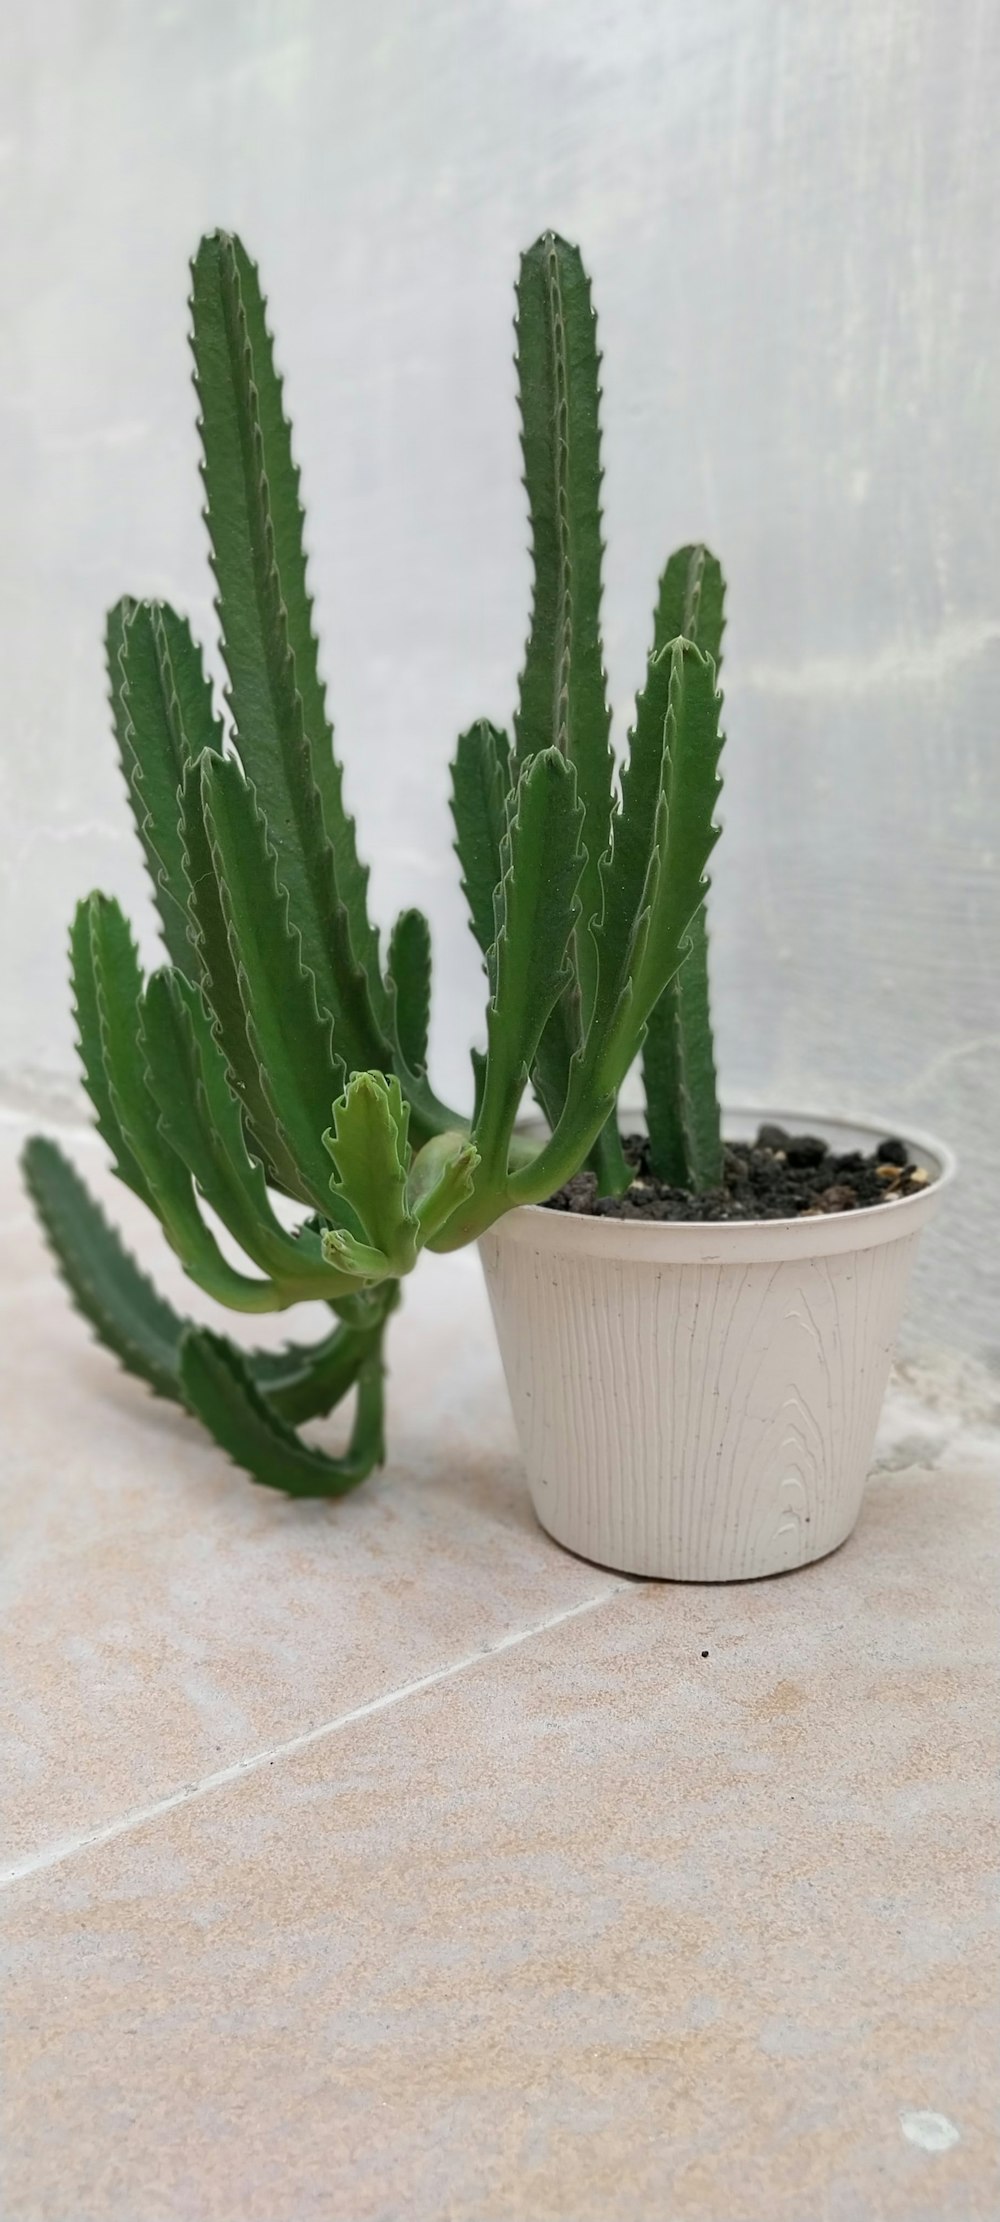 a small green plant in a white pot